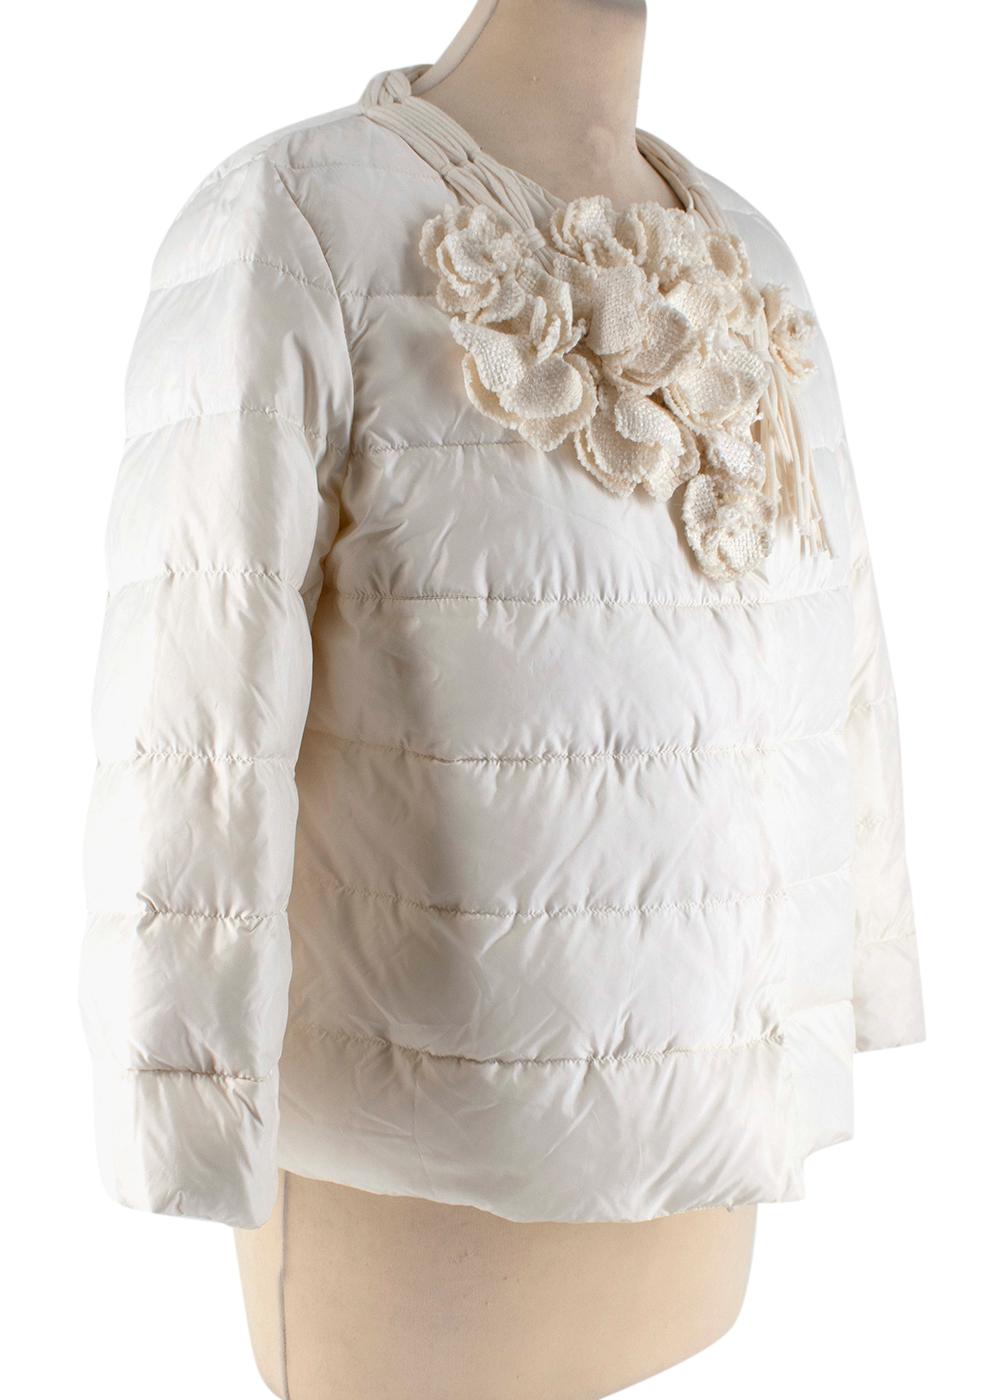 Ermanno Scervino Cream Floral Applique Collarless Puffer Jacket

- Textured floral embellishments around the neckline with stitched tassel design
- Warm mix of down and feather filling
- Light weight material
- Buttoned hidden fastening
- Round